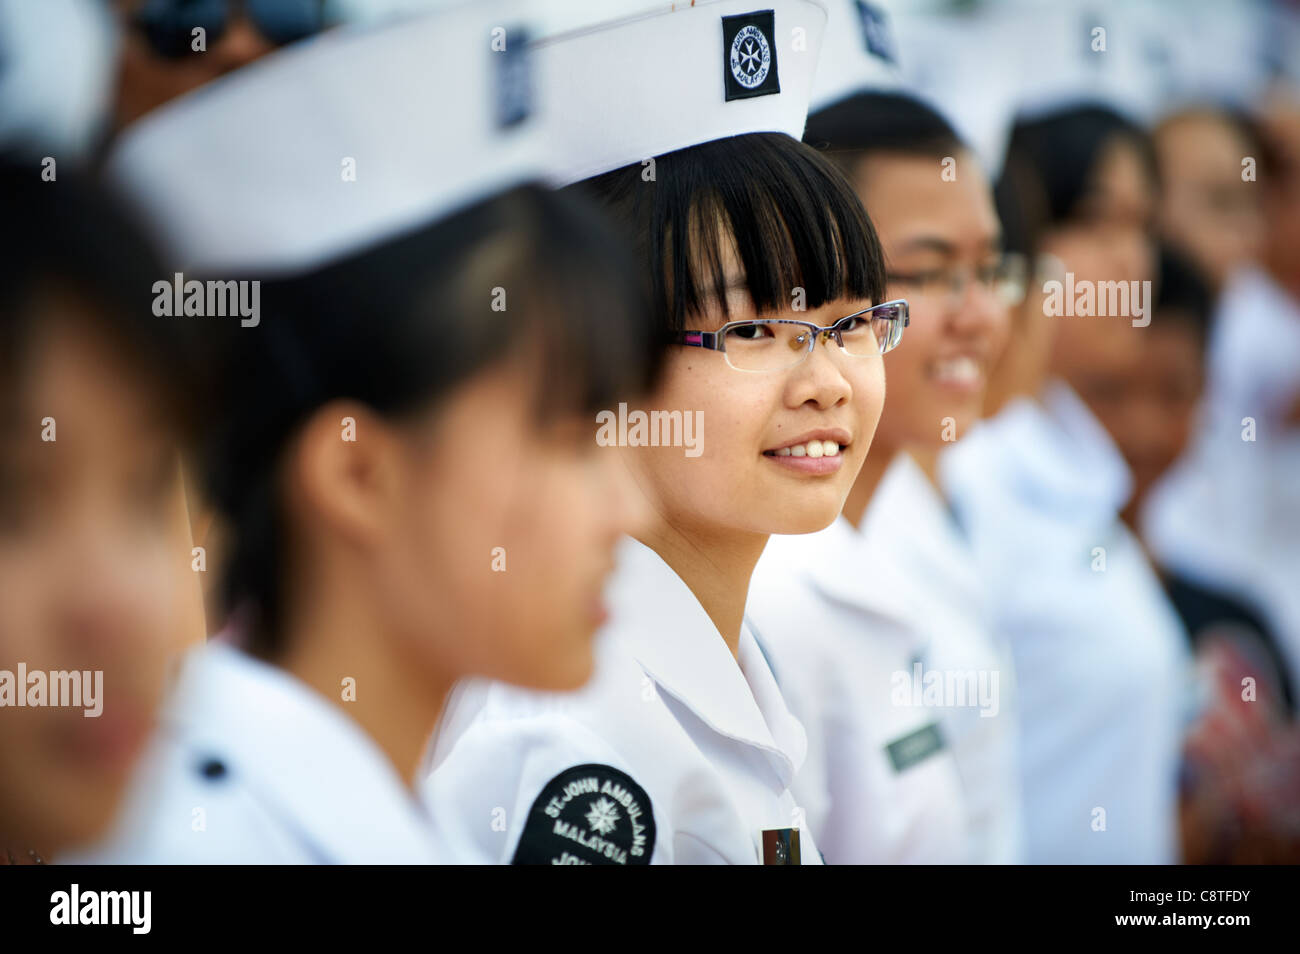 Young female nurses representing St. John Ambulance of Malaysia lined up in uniforms. Stock Photo